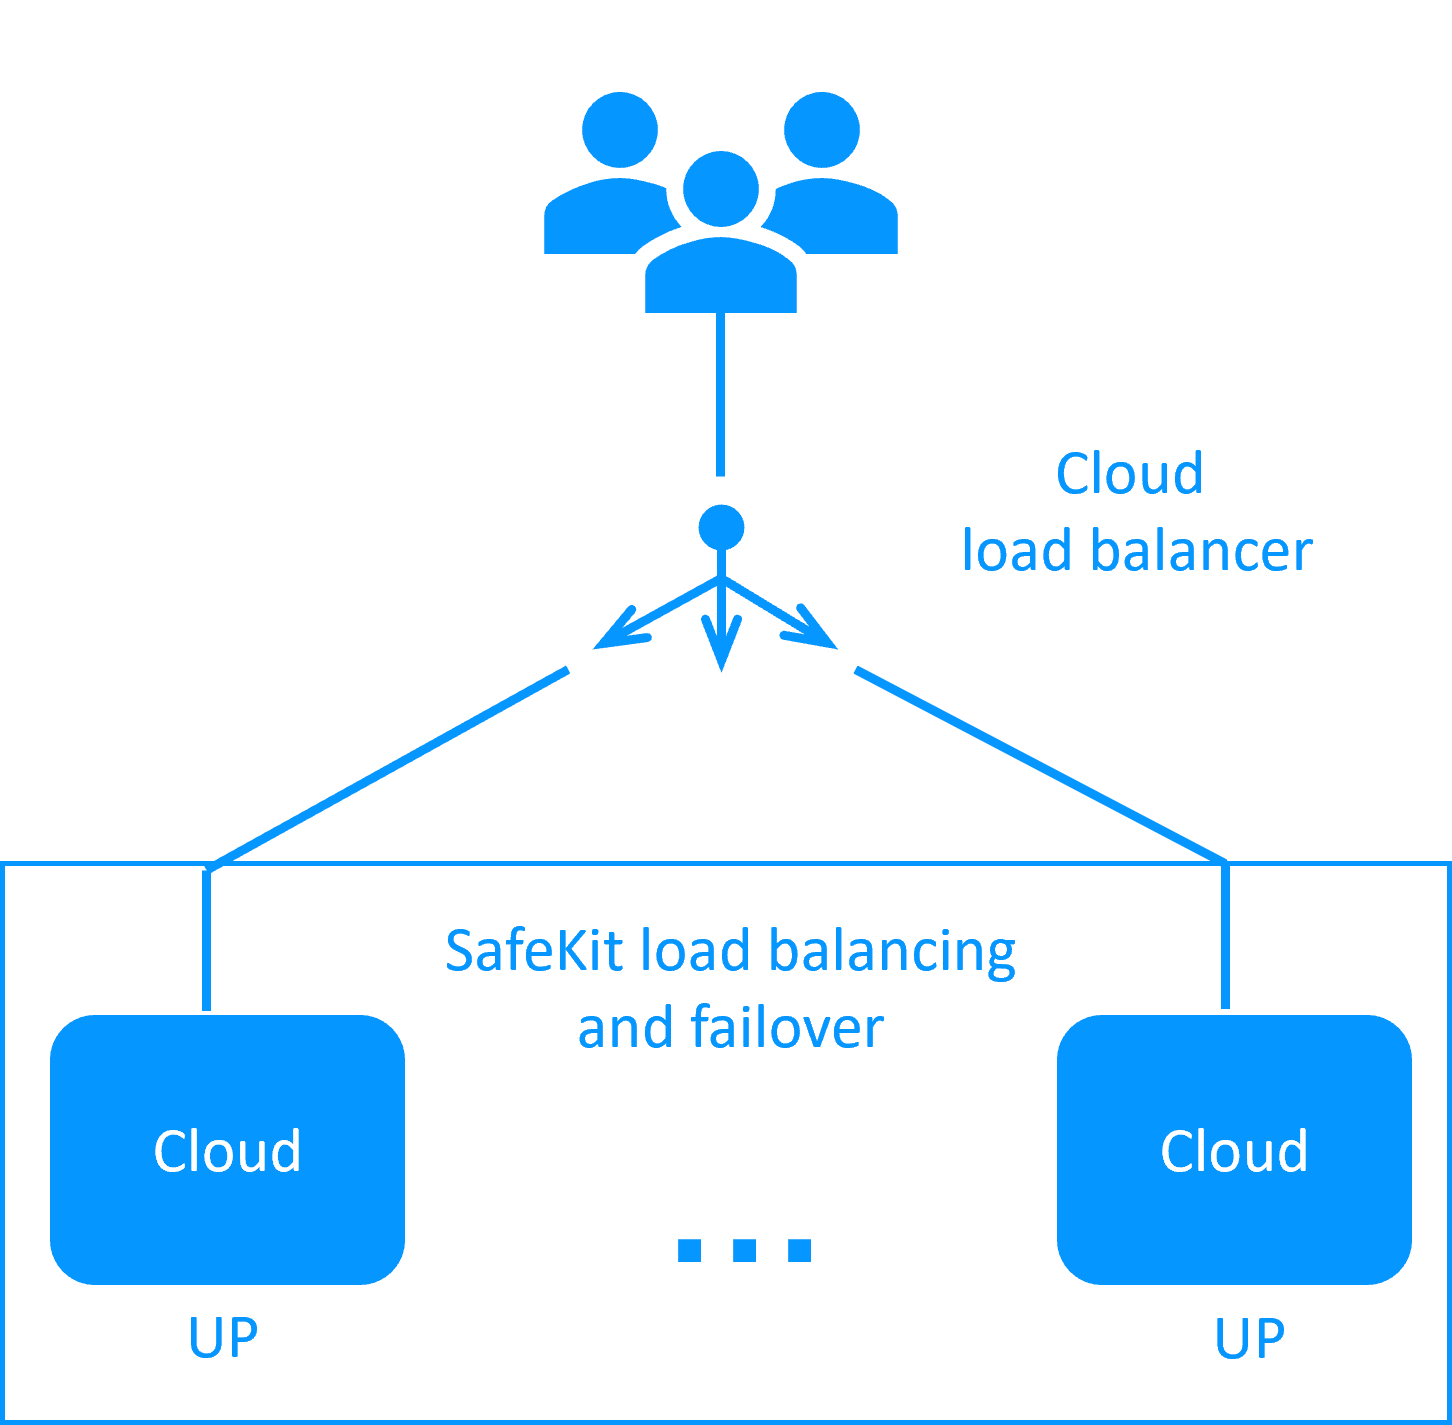 How the Evidian SafeKit farm cluster implements load balancing and failover in Cloud?